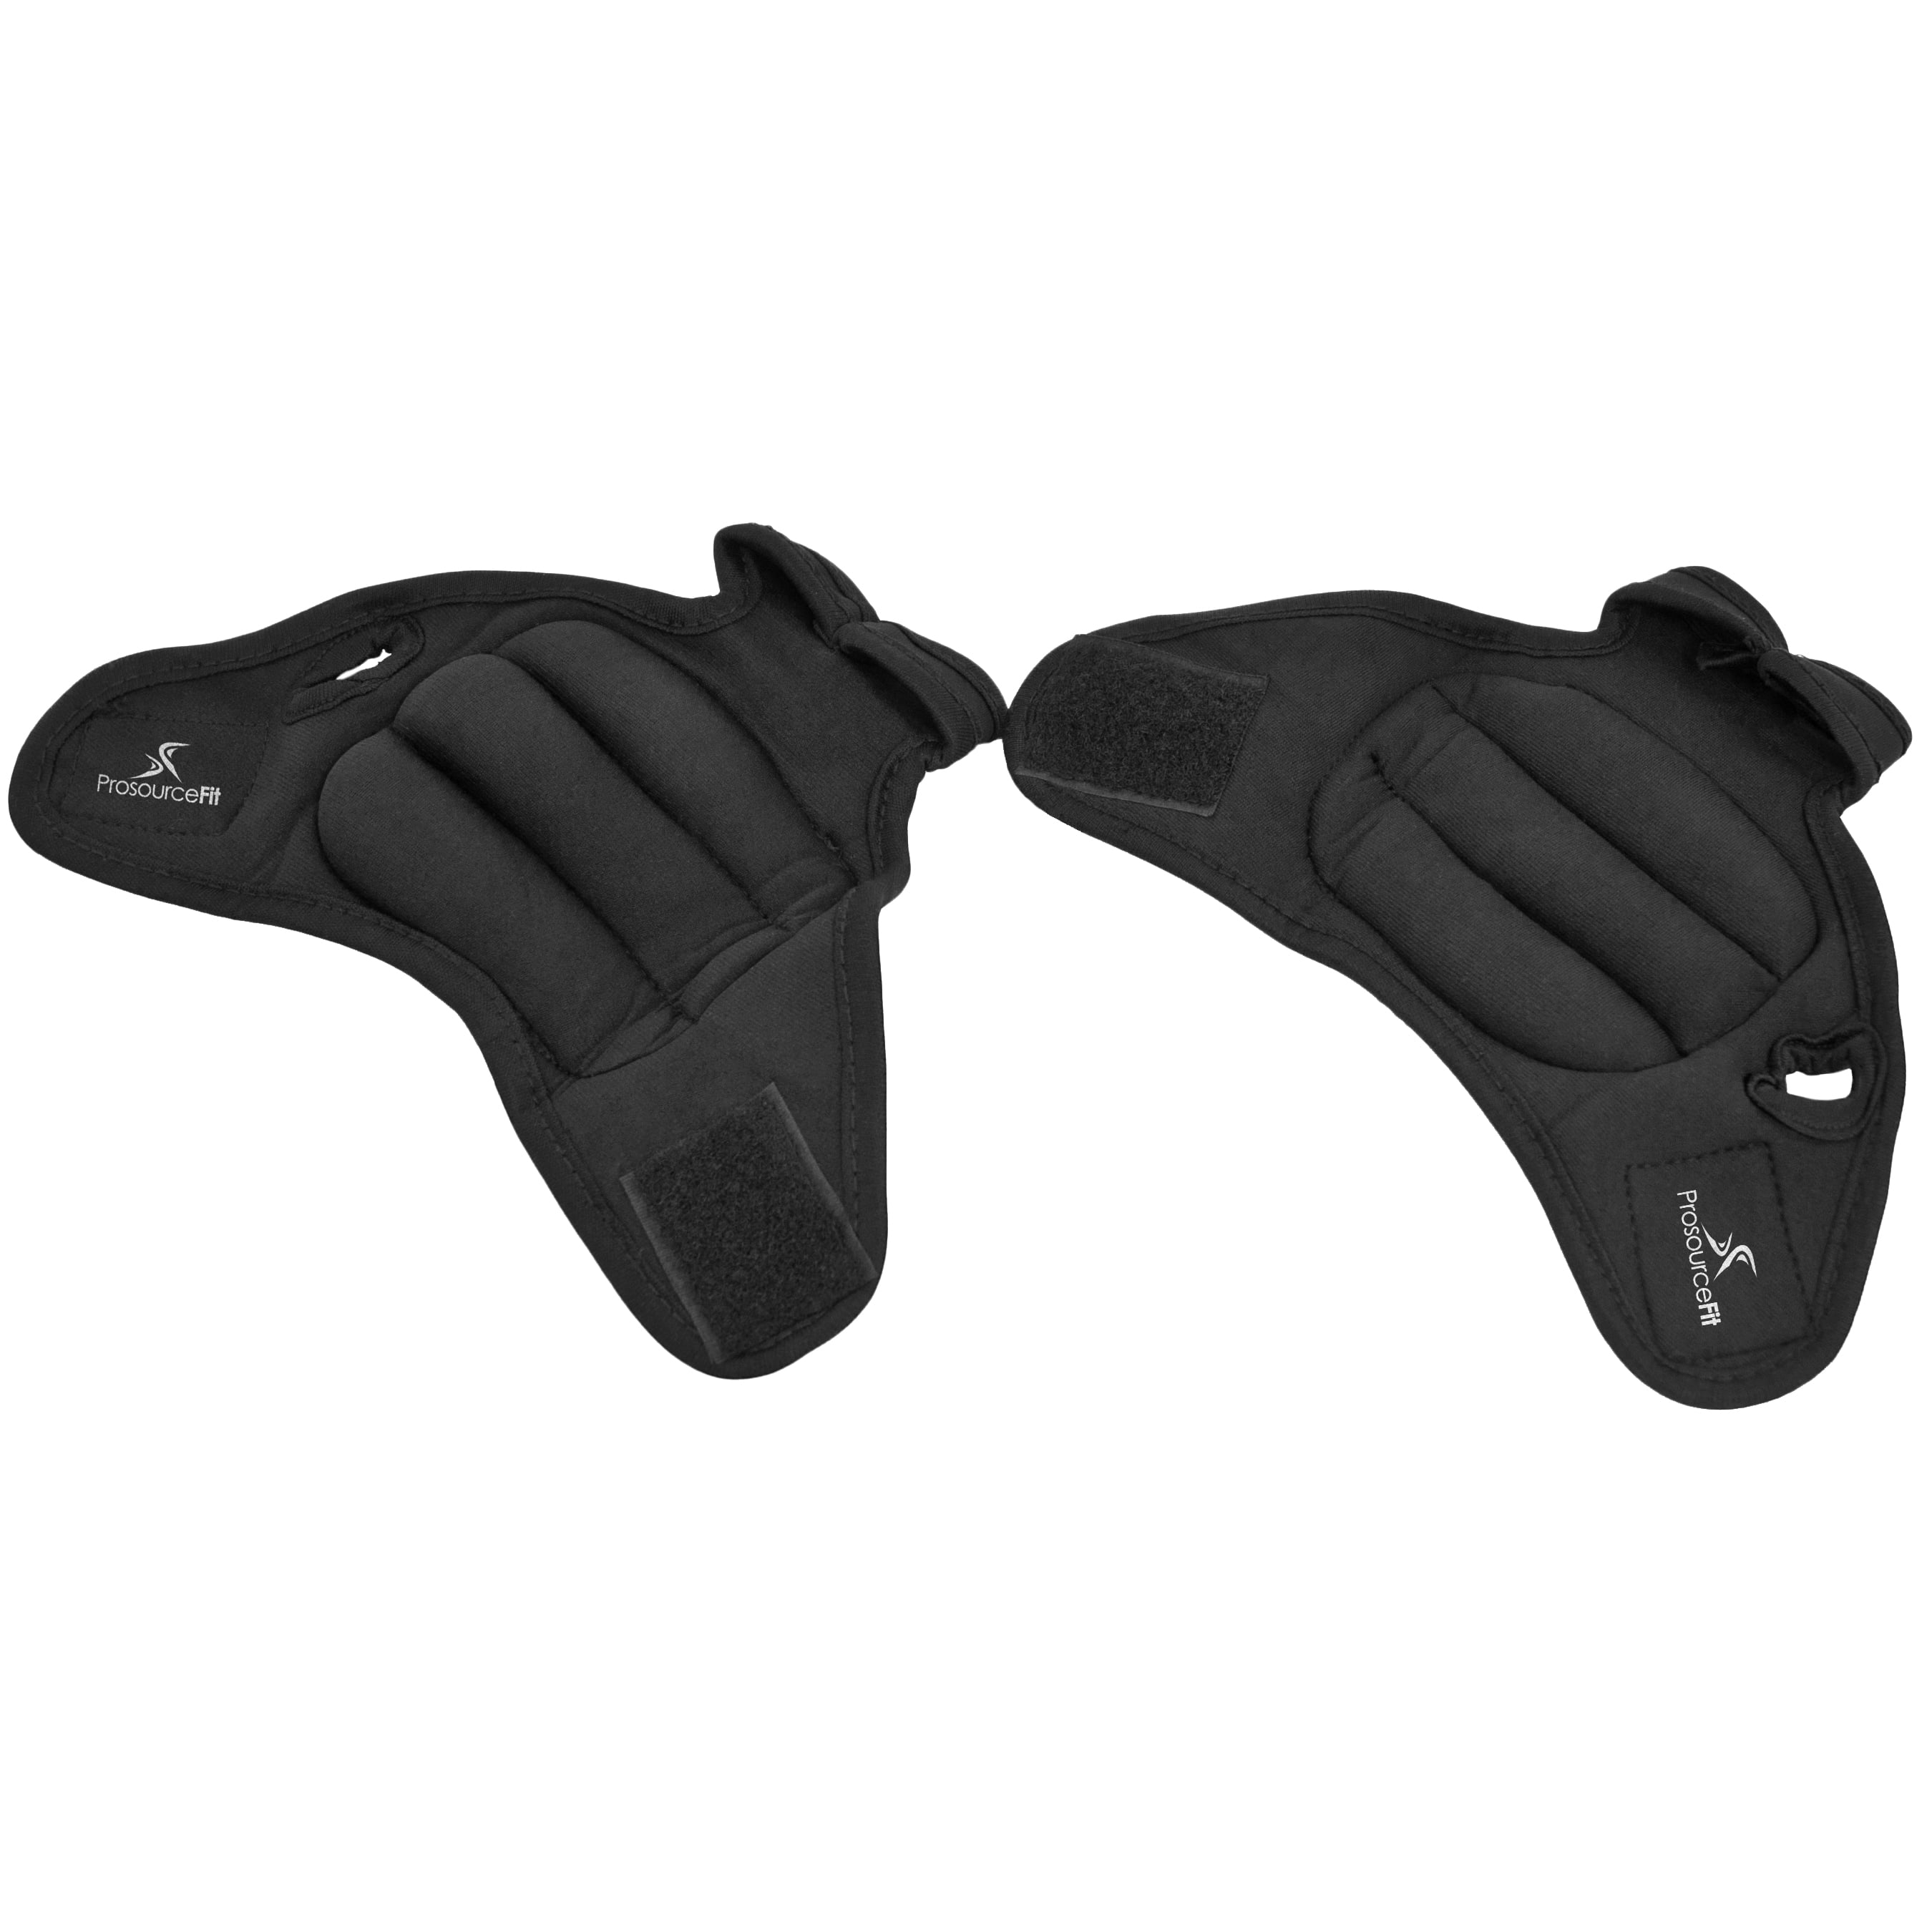 Removable Weight MaxxMMA Adjustable Weighted Gloves 2 x 0.5 lb Each 